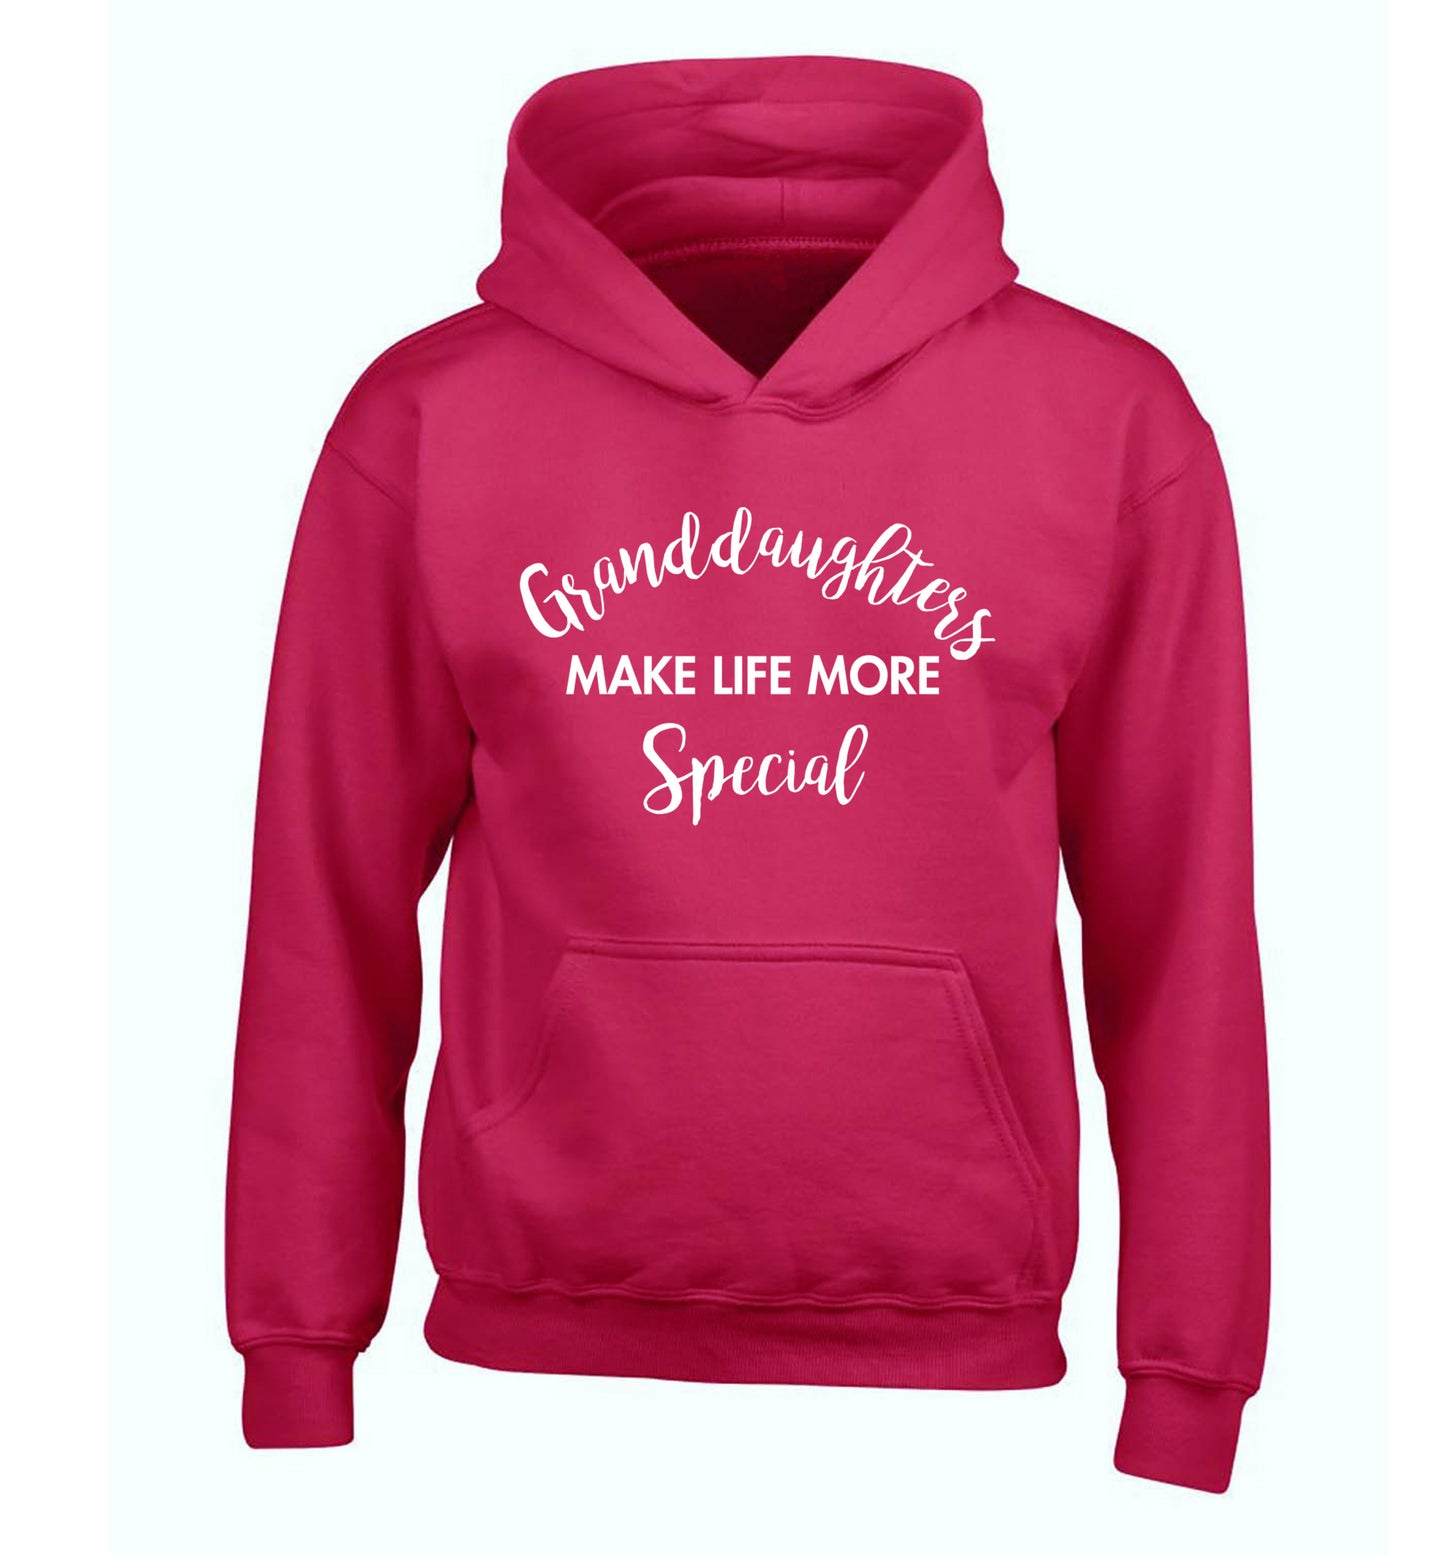 Granddaughters make life more special children's pink hoodie 12-14 Years